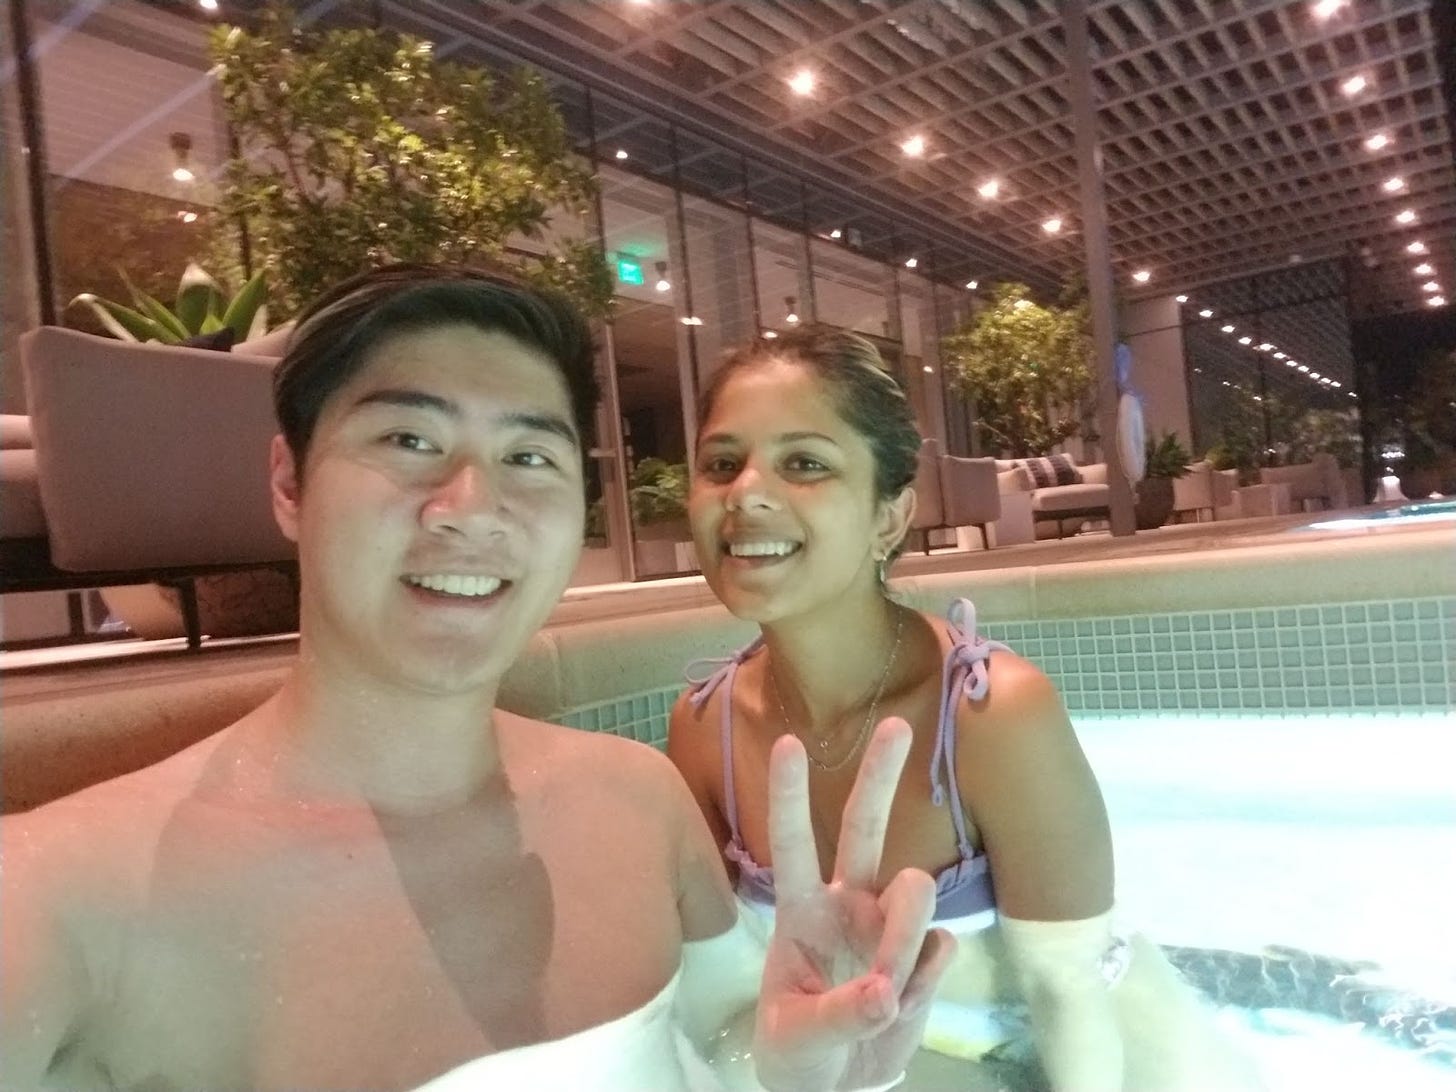 Anthony and his friend smile in a hot tub. Anthony throws up a peace sign.